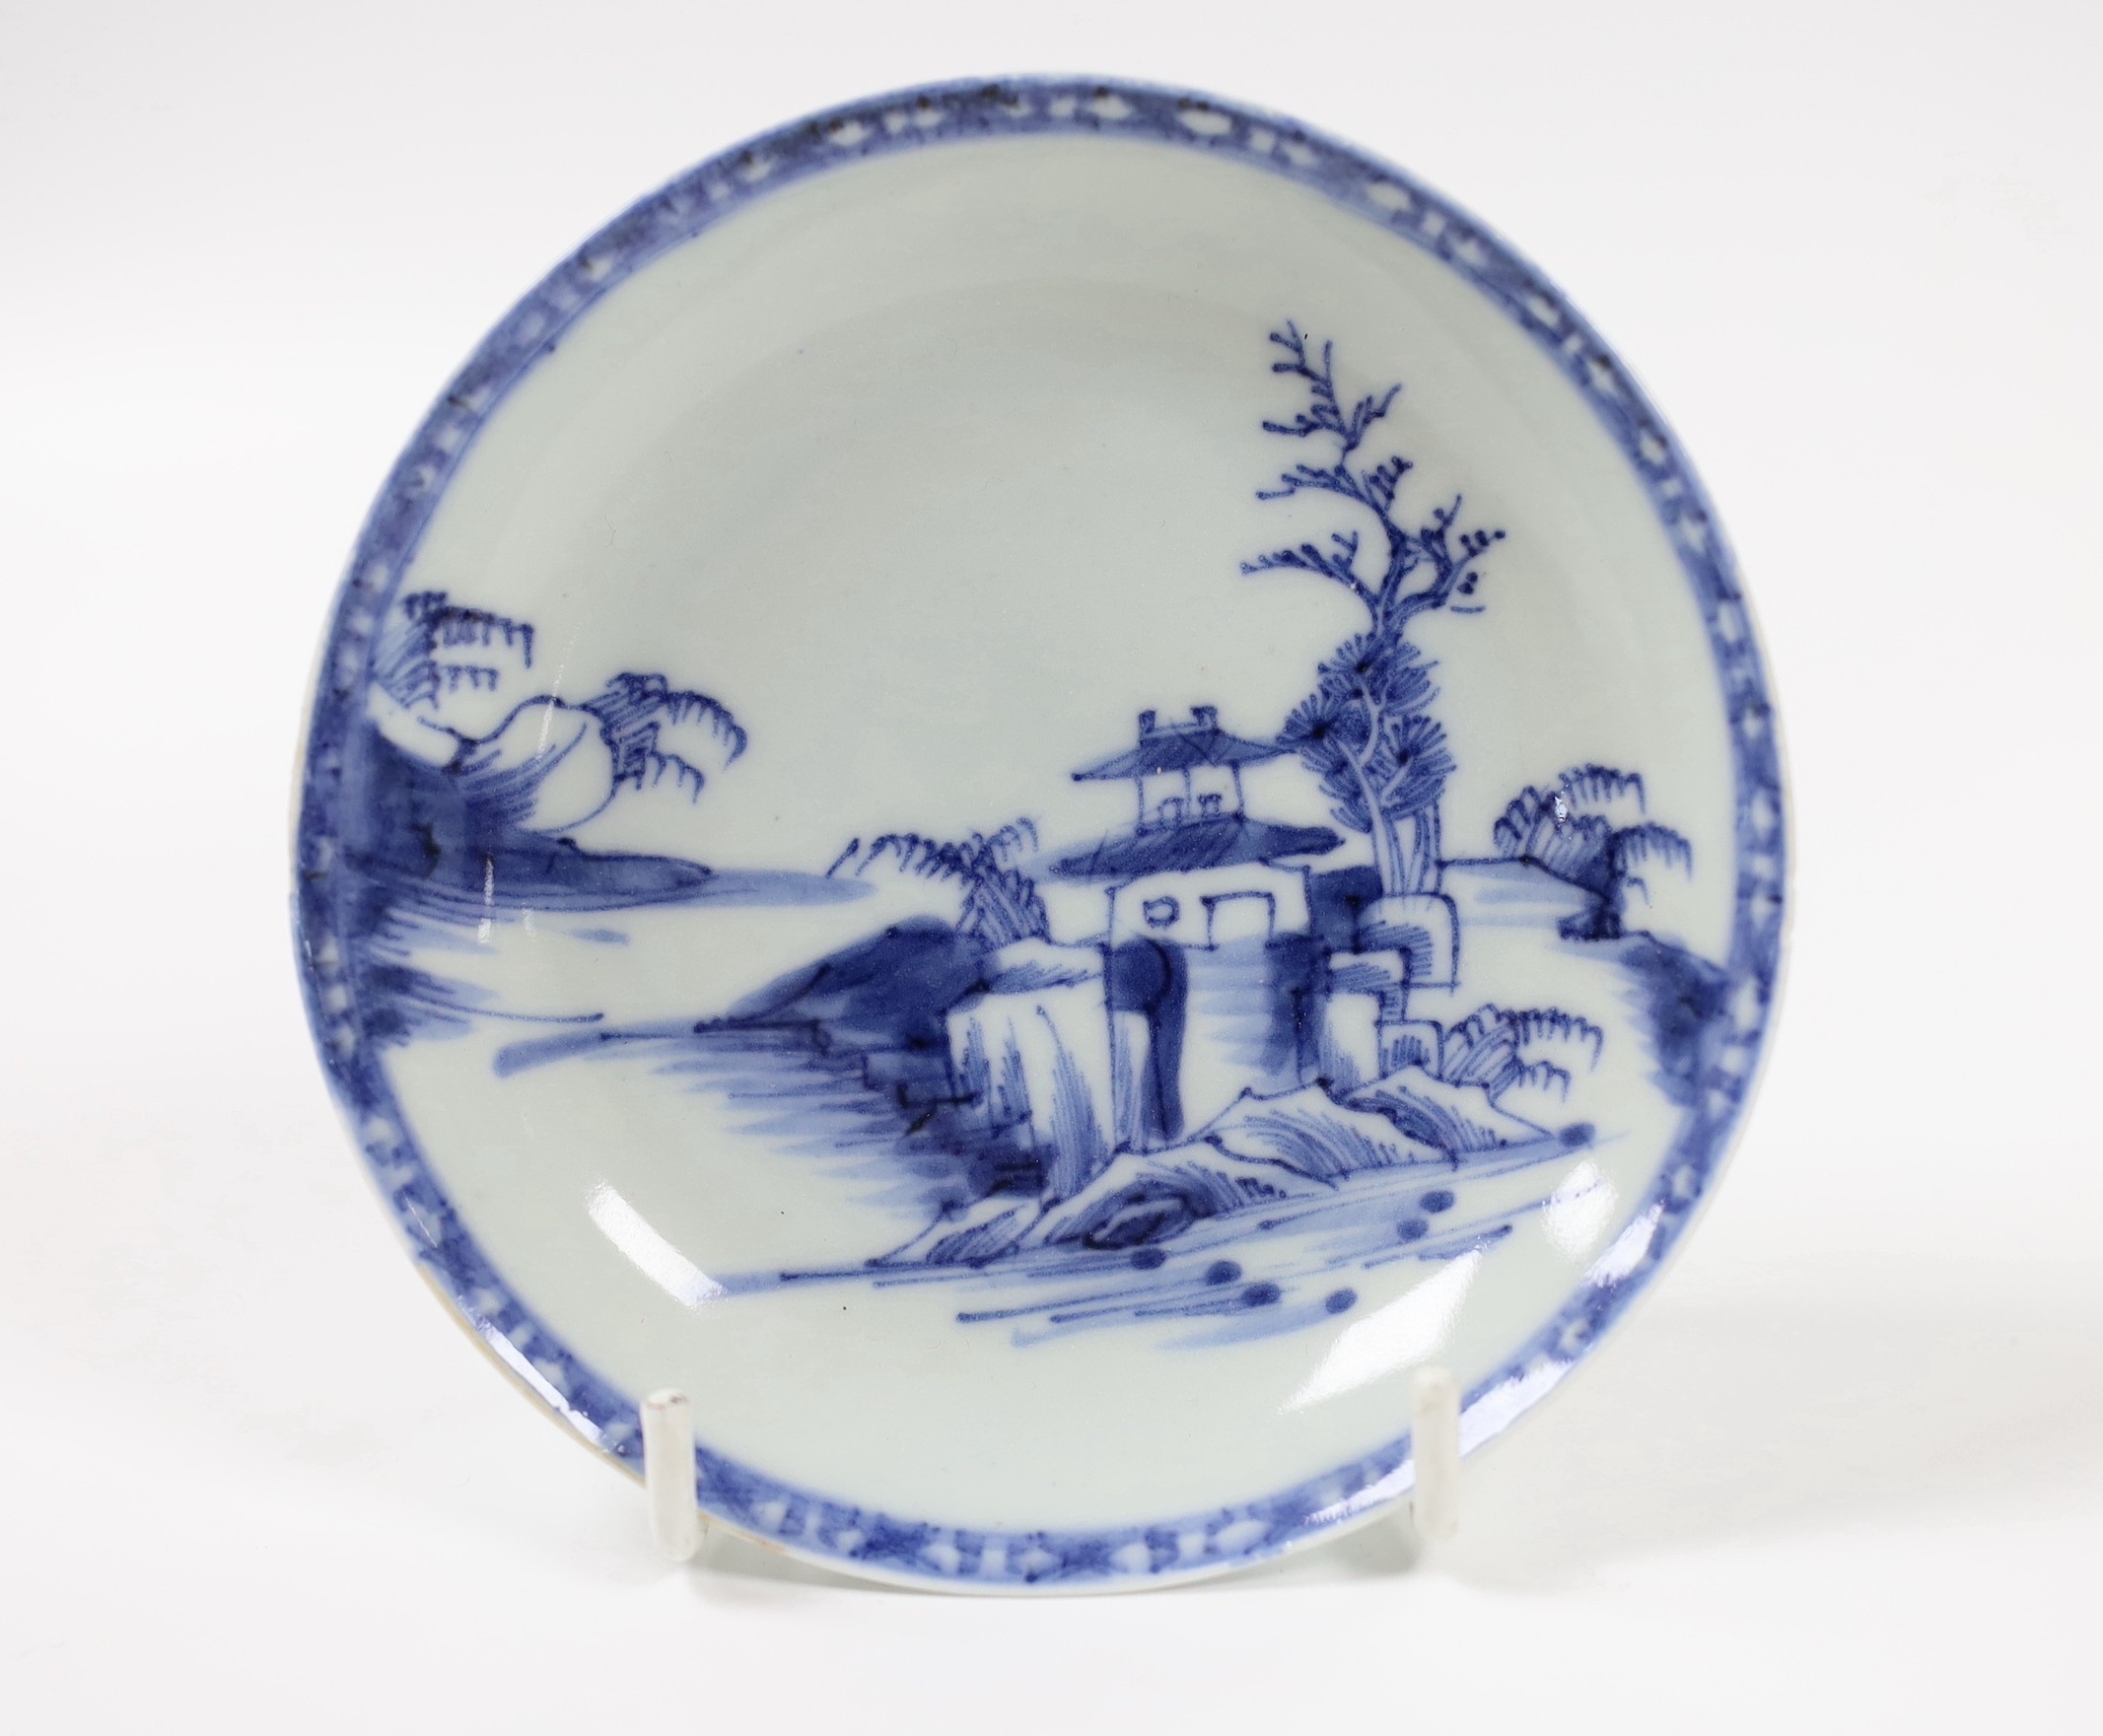 A Nanking Cargo blue and white tea bowl and saucer, 4cm tall